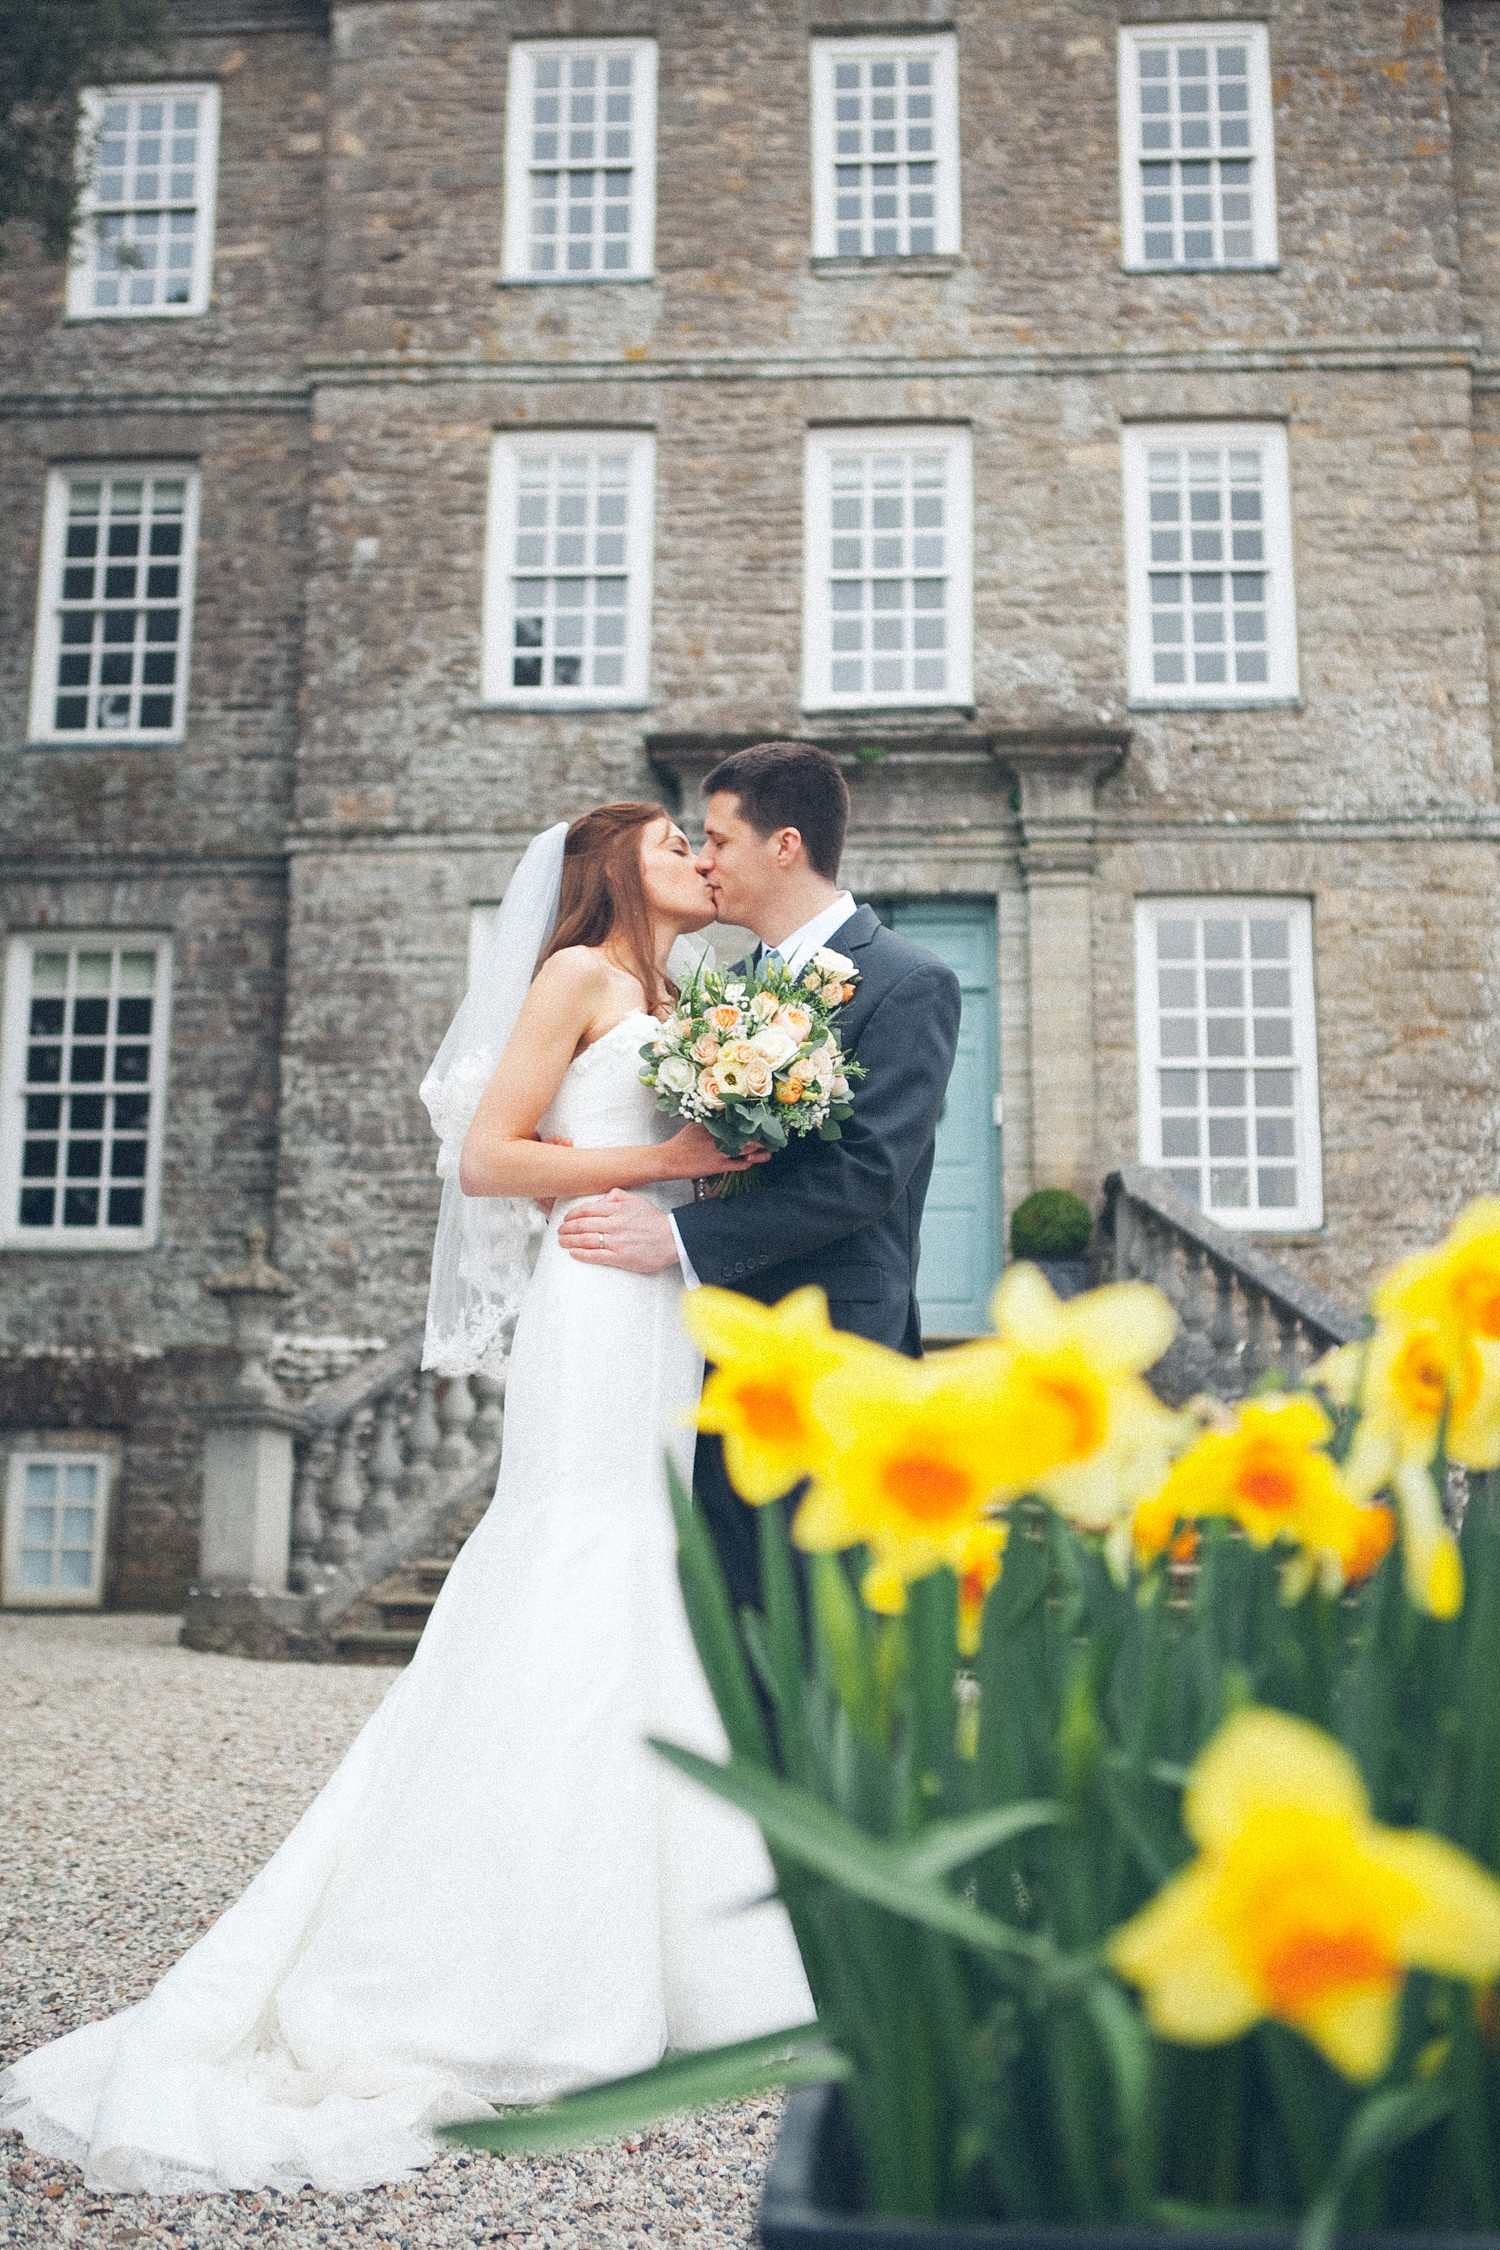 19th March 2016. Kingston Estate, Staverton, Totnes. Louise and George.